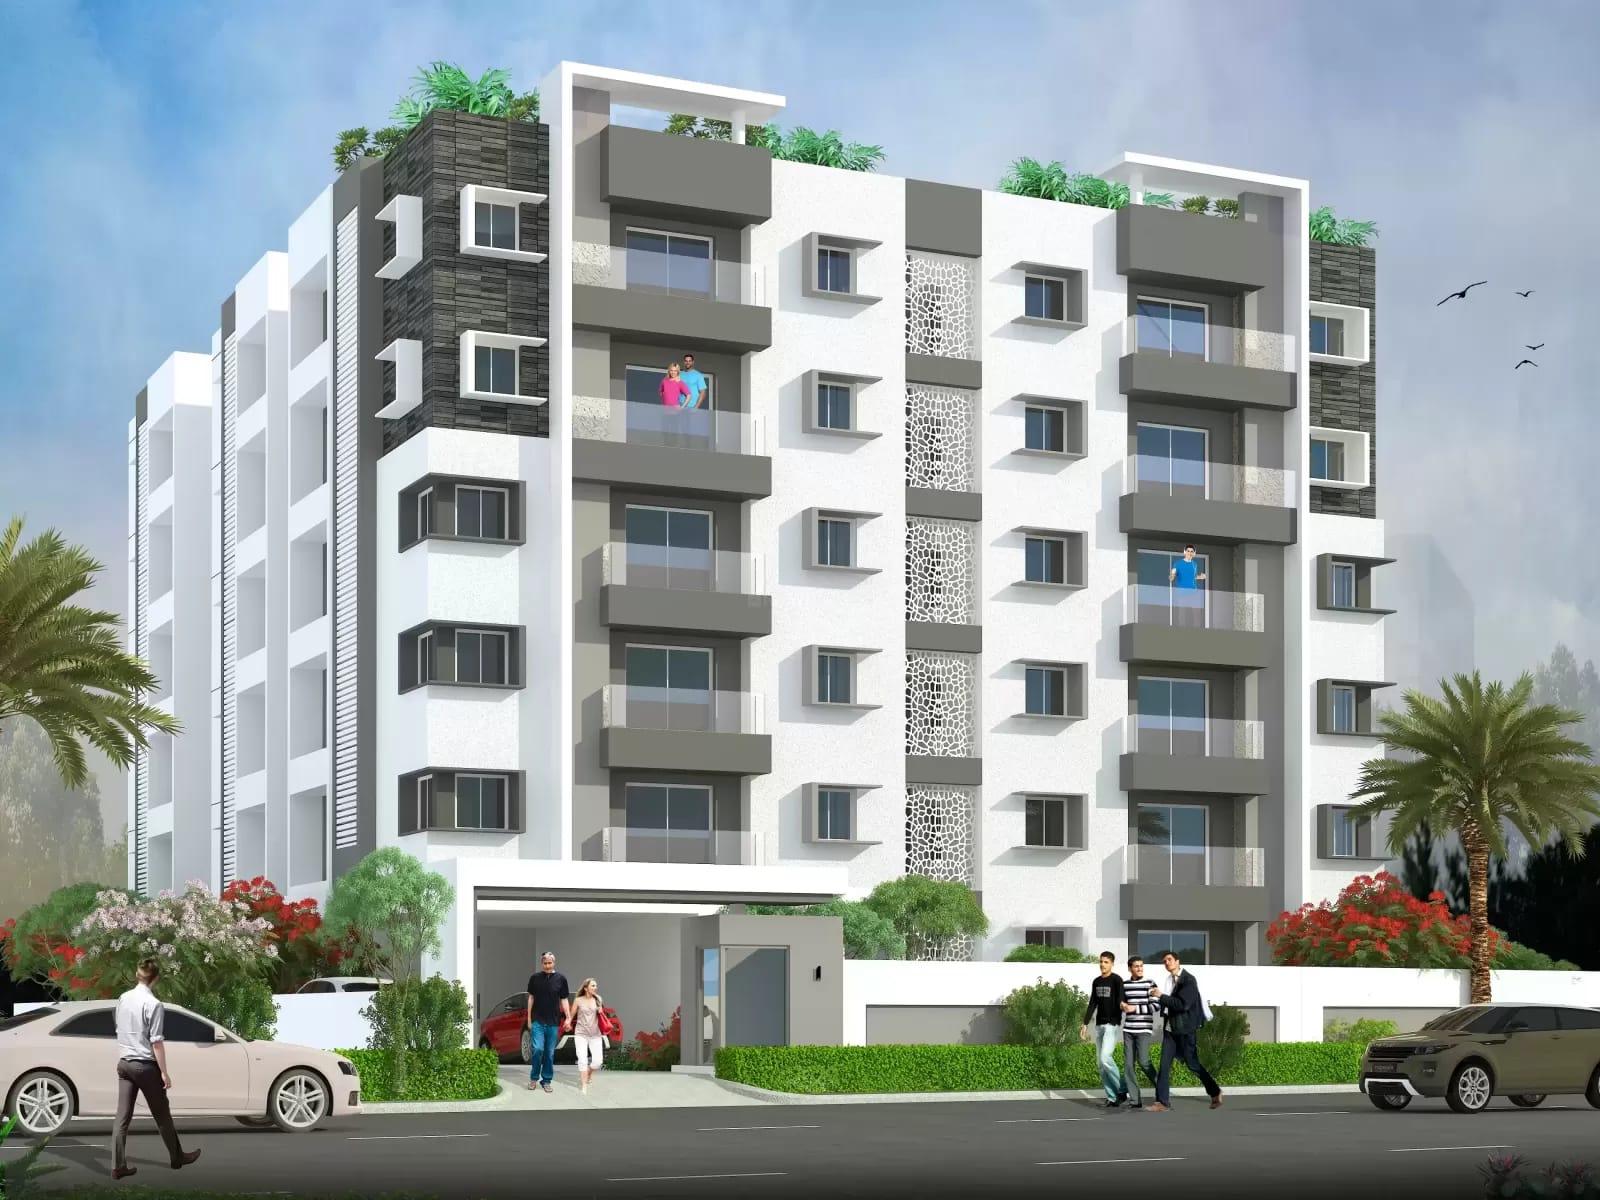 2 Bed/ 2 Bath Sell Apartment/ Flat; 1,145 sq. ft. carpet area; Ready To Move for sale @Bachupally Road, Pragathi Nagar